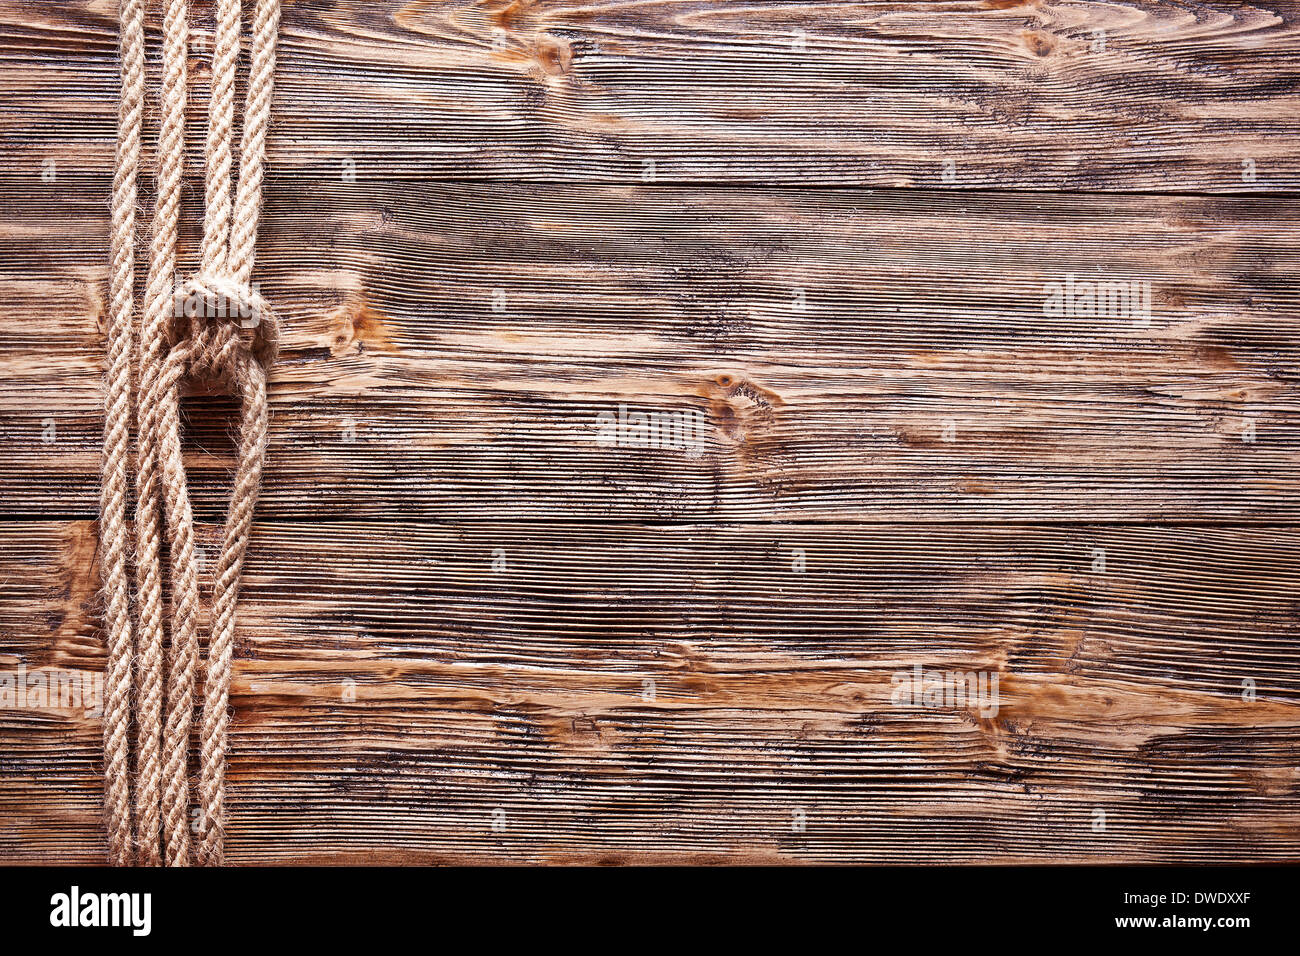 Sailor's knot over old wooden background. Stock Photo